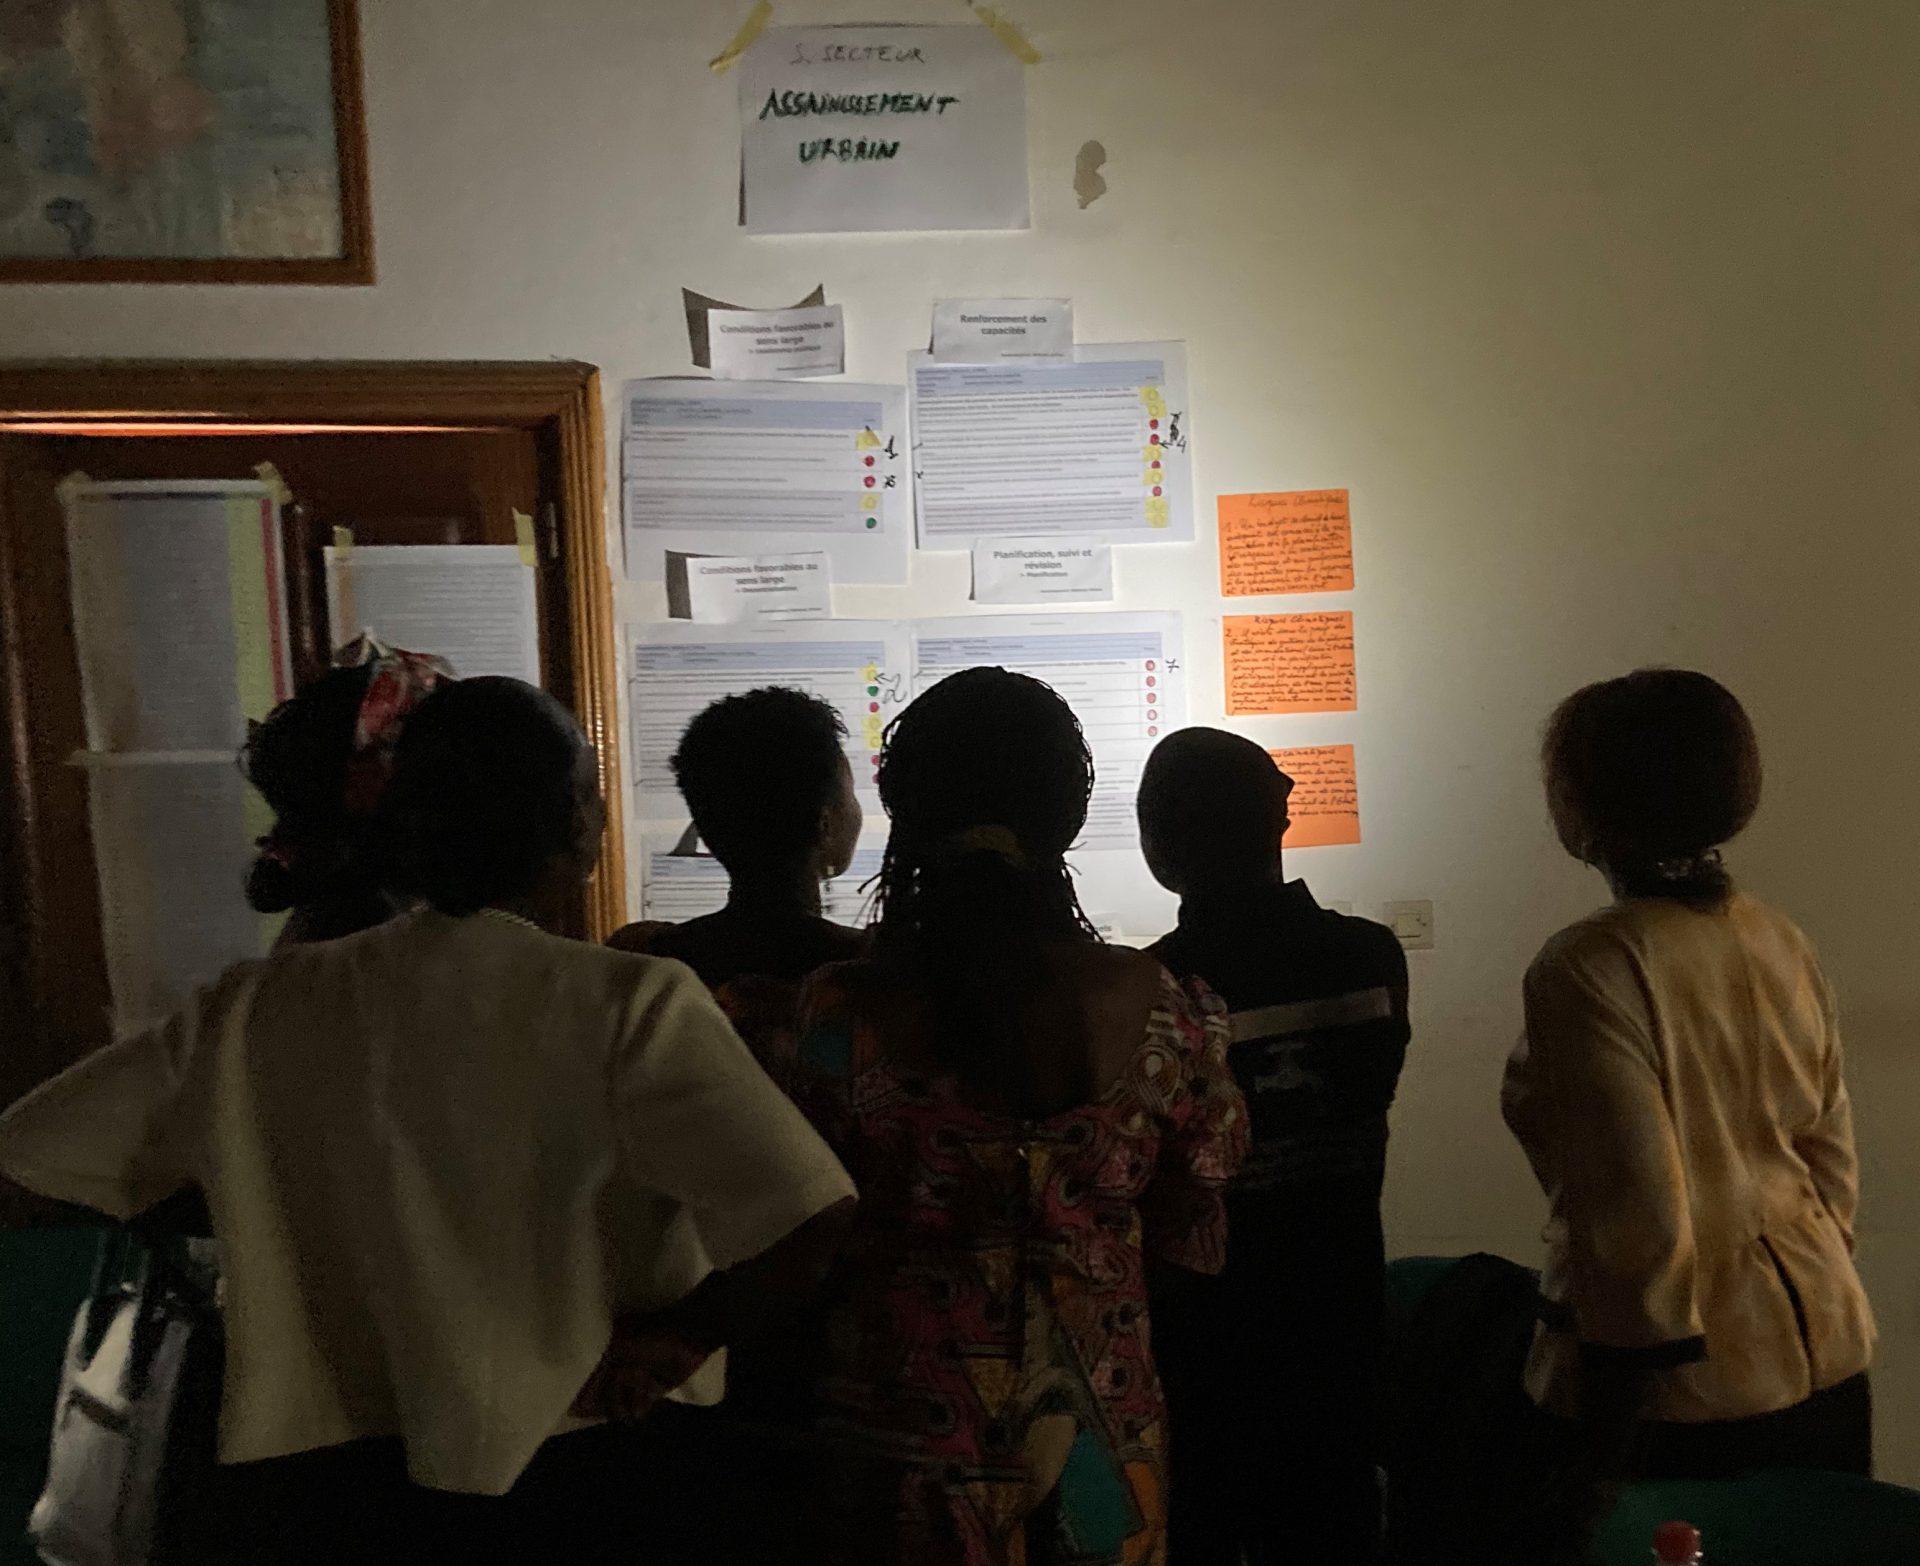 Participants, with their backs facing the camera, at a workshop on water, sanitation and hygiene read notes pasted to a wall in Central African Republic.